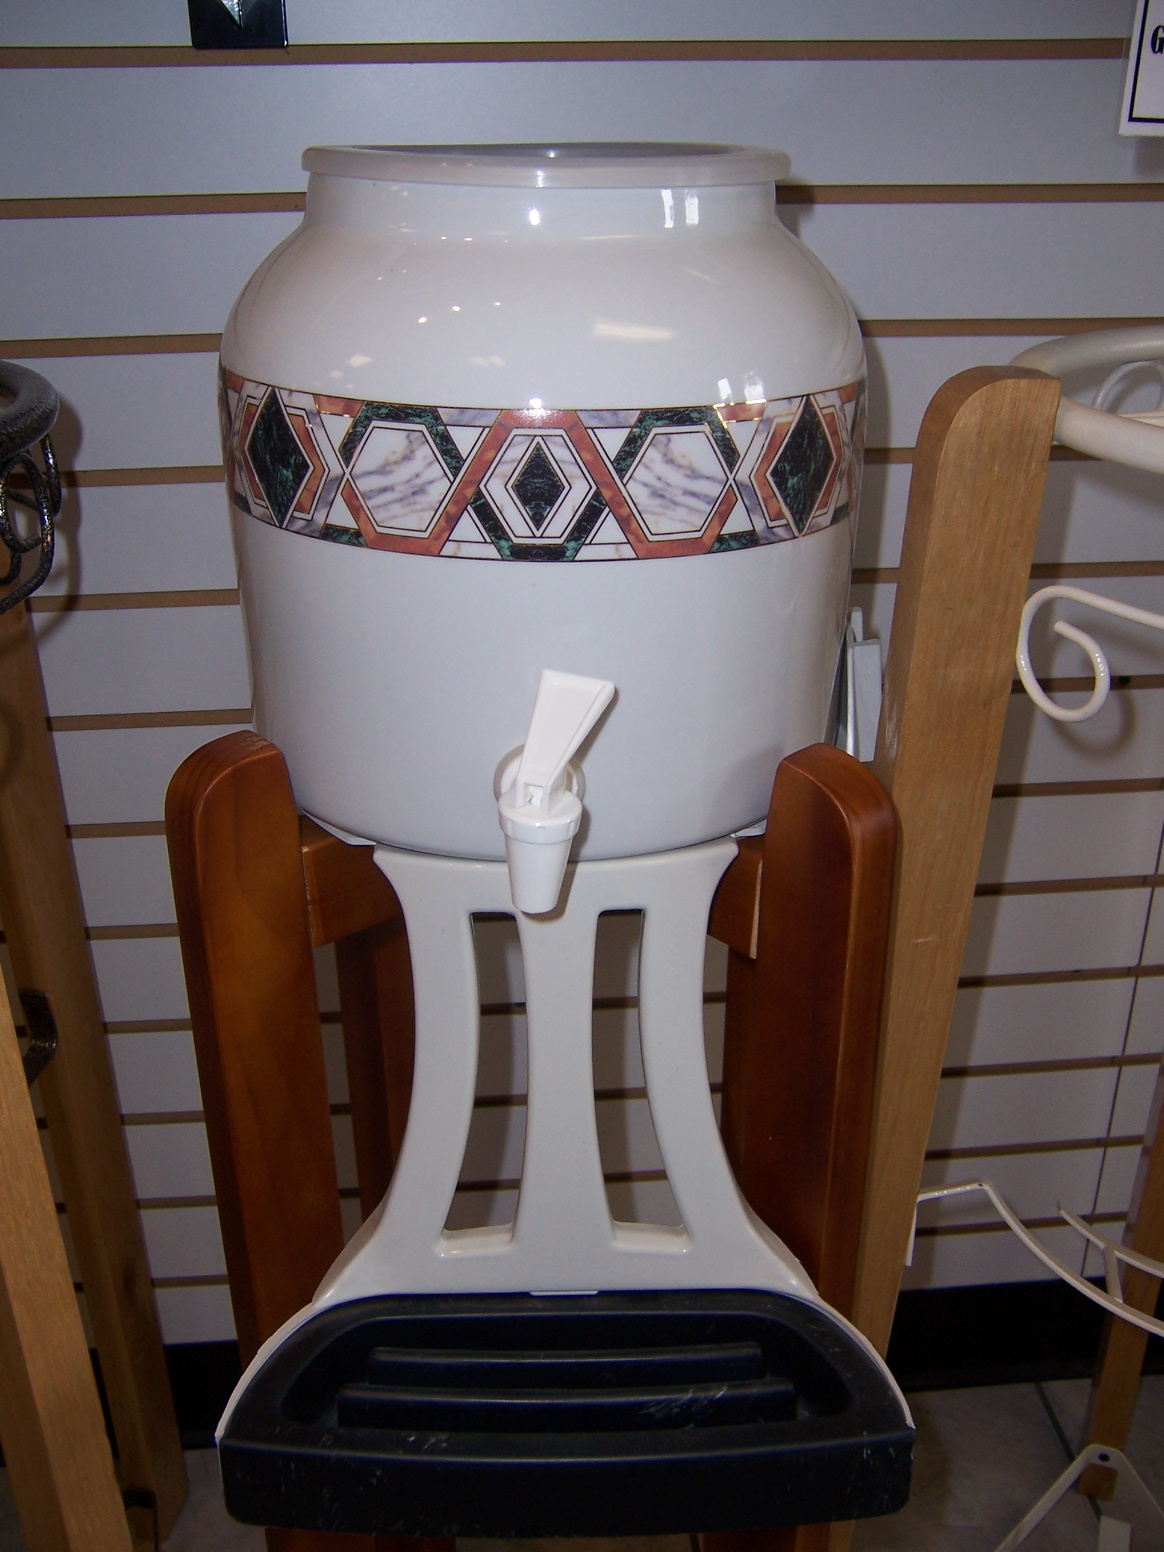 Porcelain Crocks And Stands Topeka S Own Water Store